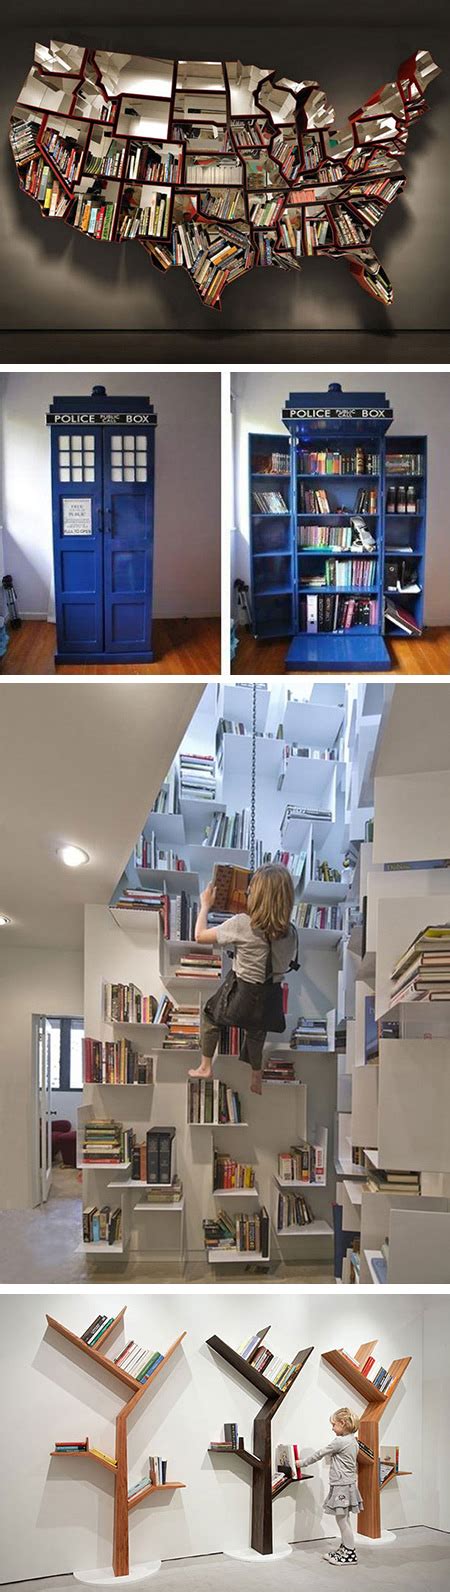 32 Cool And Creative Bookshelves That Geeks Would Love Techeblog